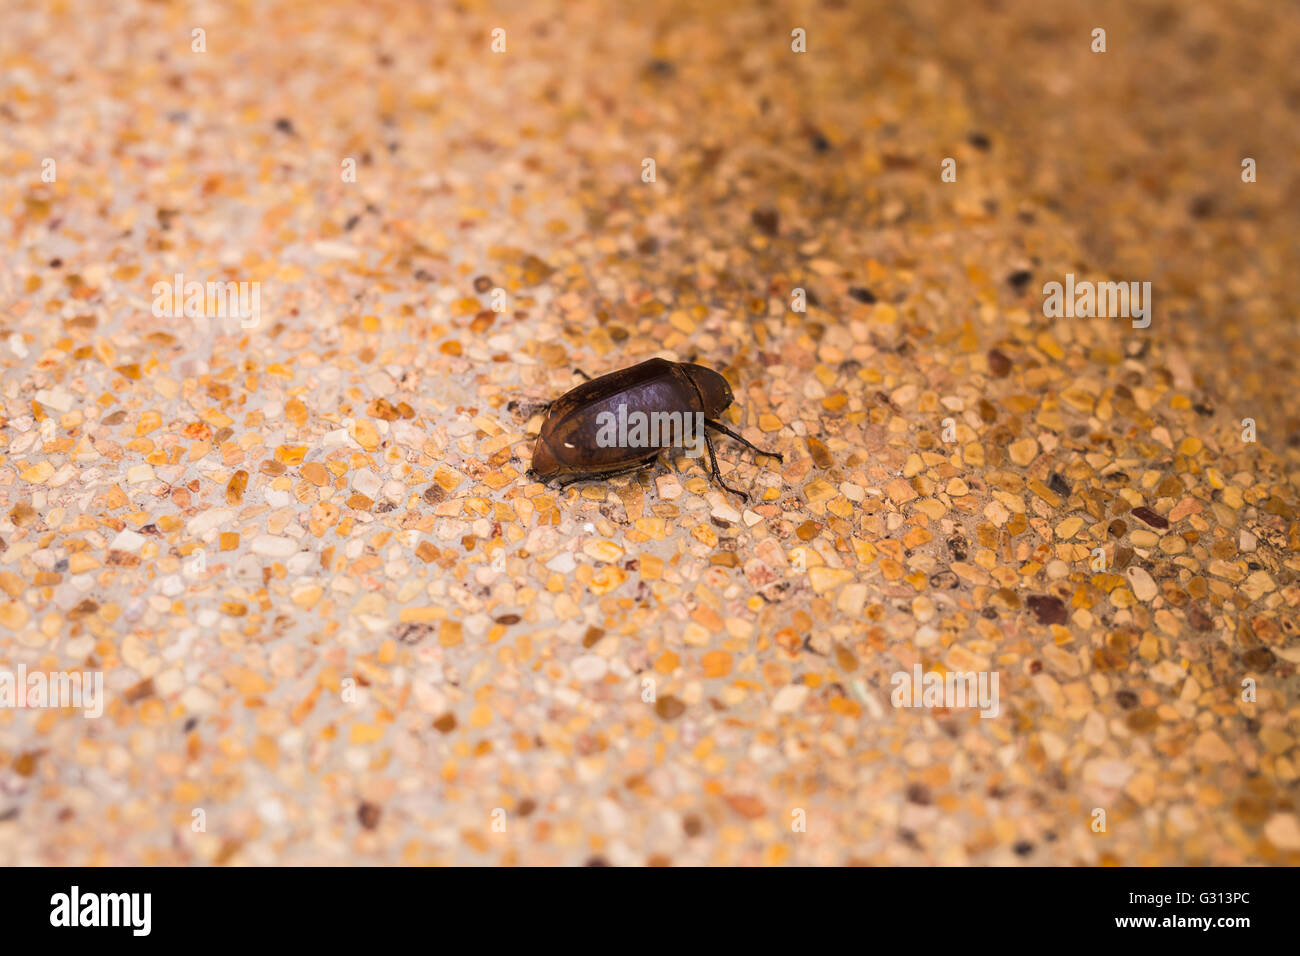 Closeup photo of a beetle on the floor Stock Photo